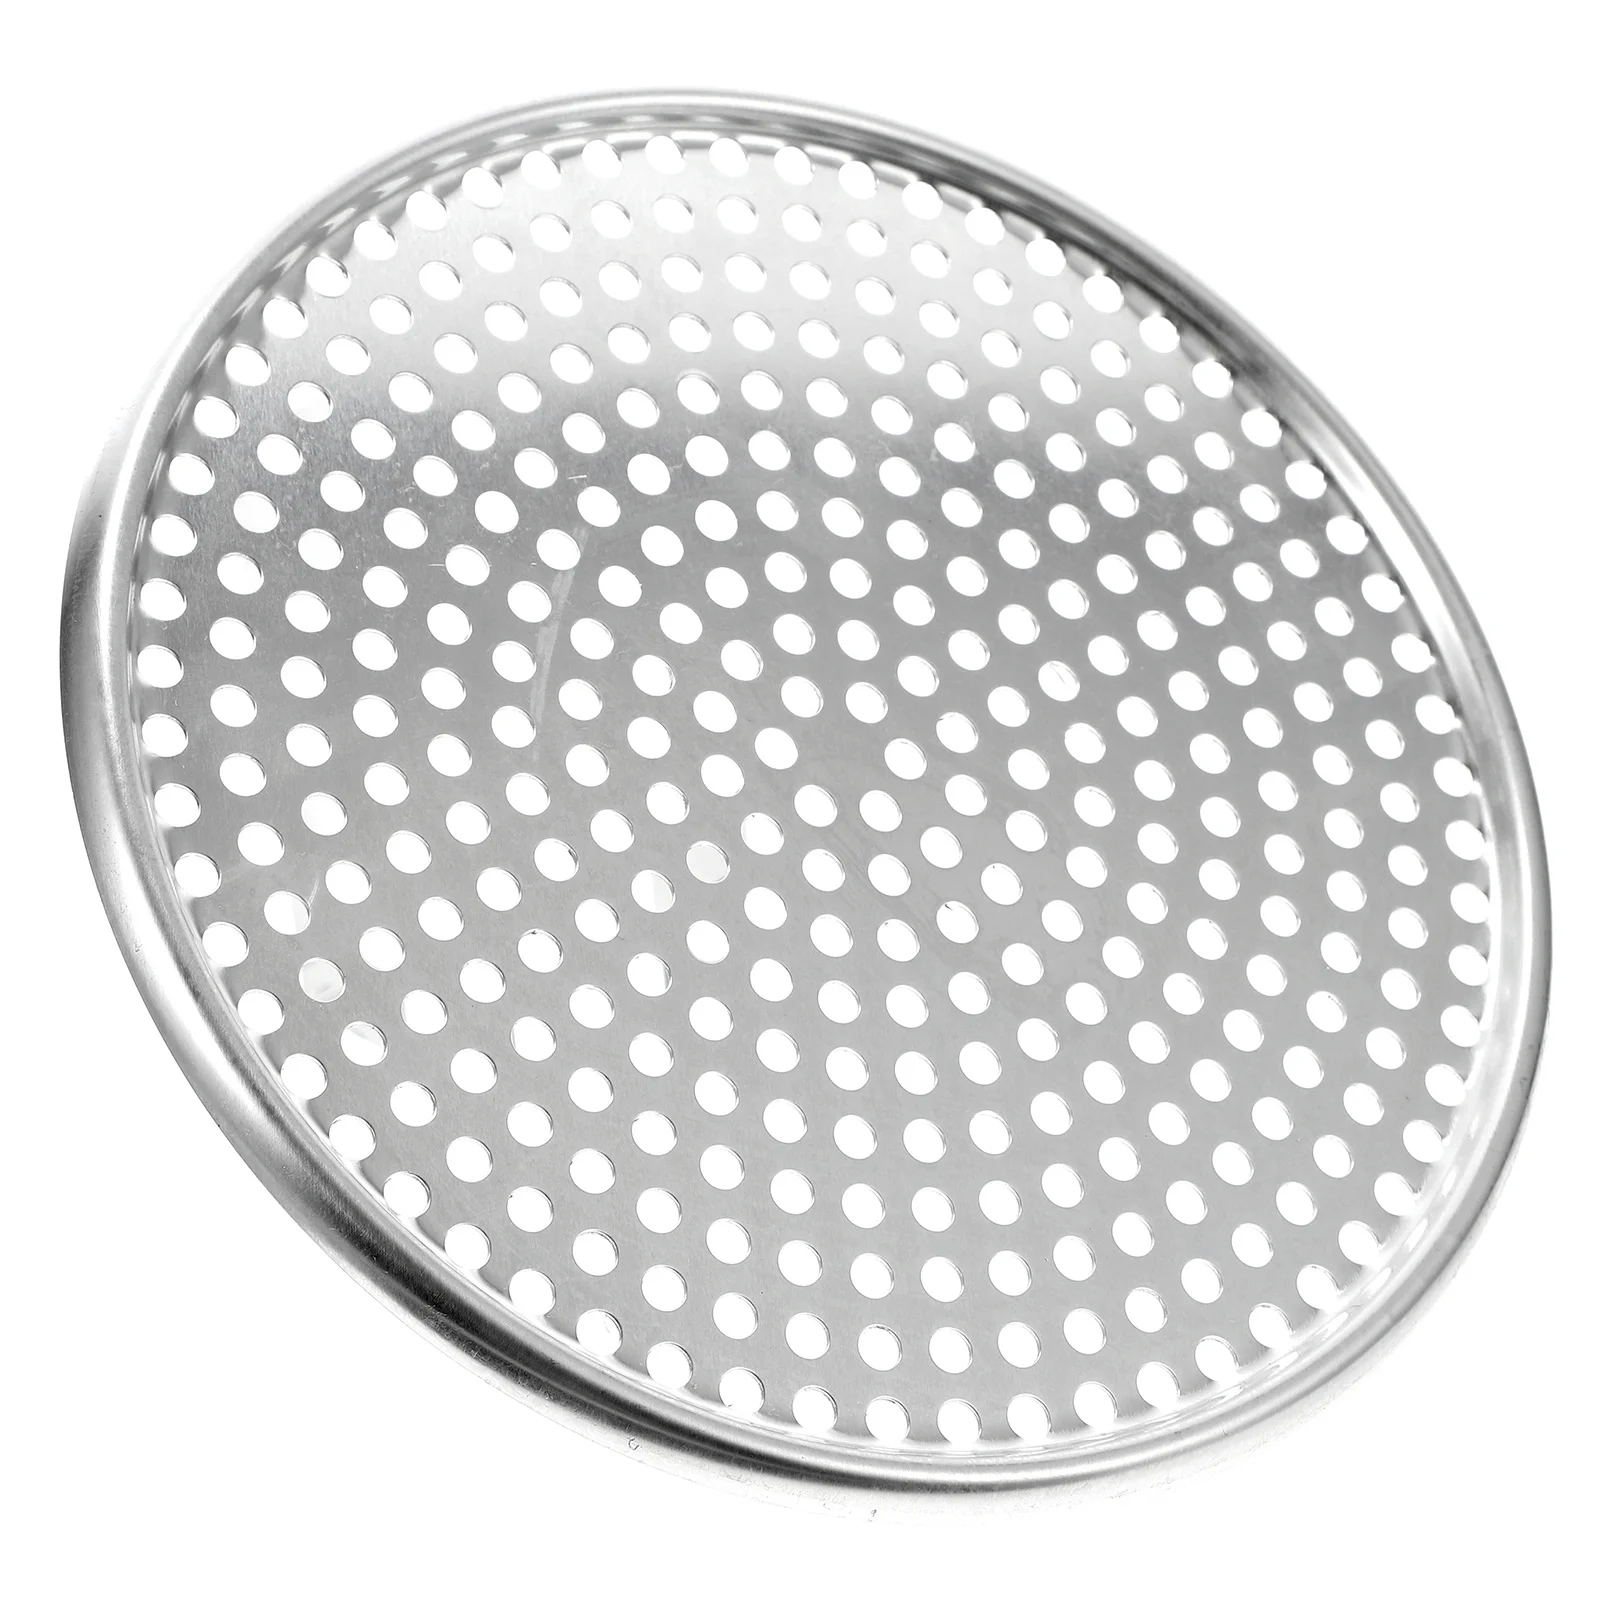 

Pizza Pan Baking Tray Pans Oven Plate Inch Stick Non Round Screen Sheet Bakeware Dish Bread Roasting Steel Holes Deep Net Pie